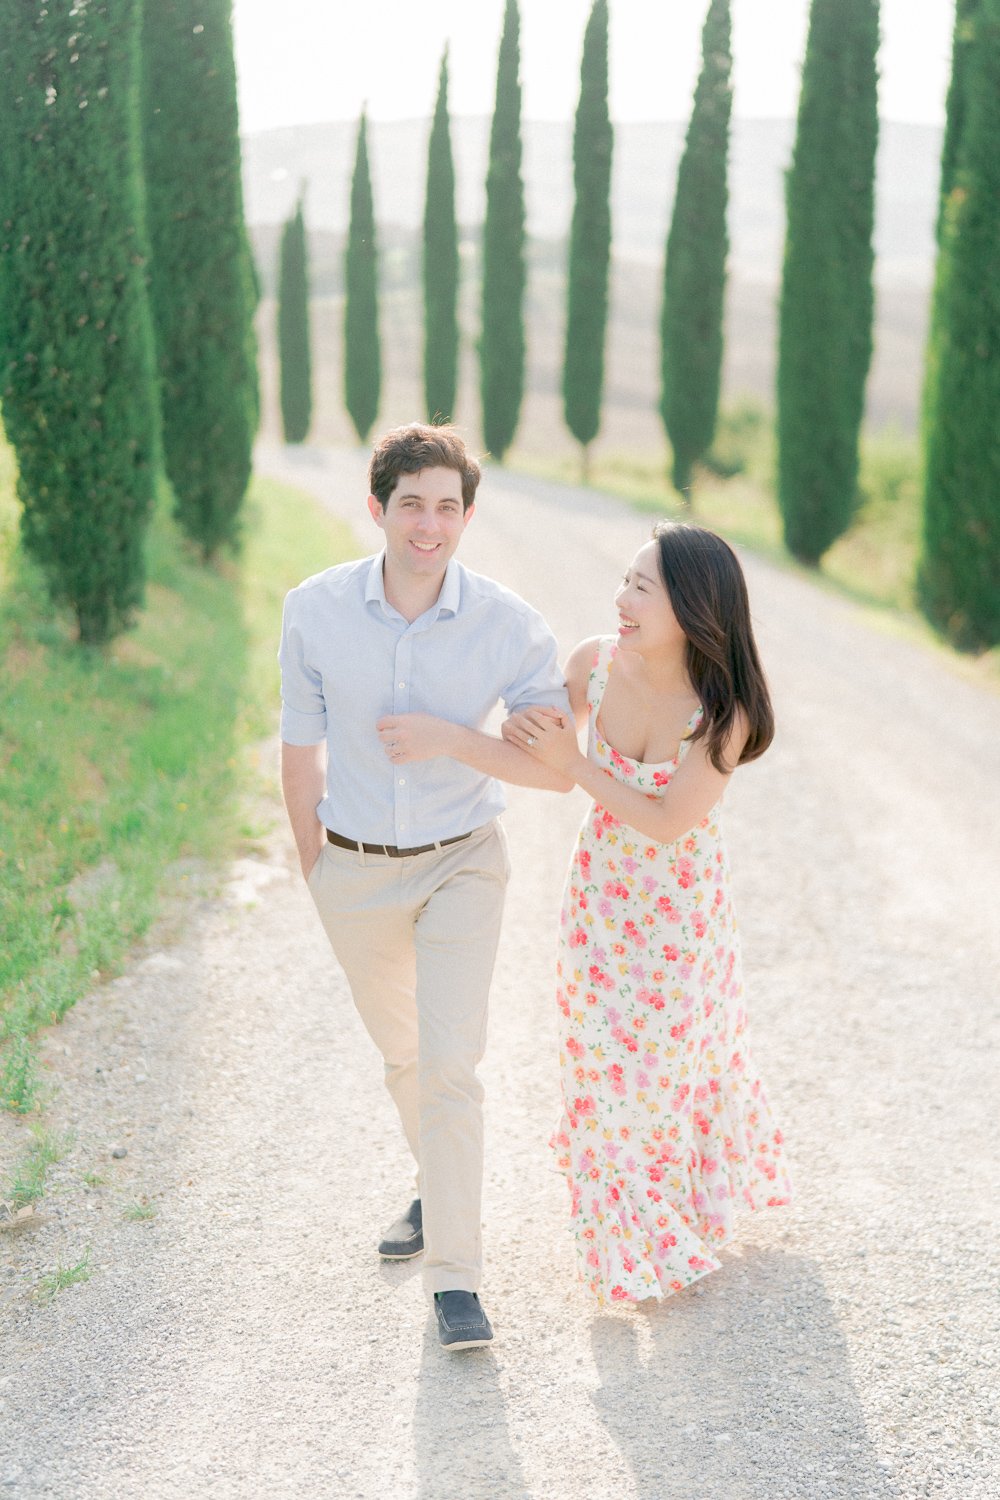 Saori and pierre engagement session in tuscany by giuseppe giovannelli photographer 03.jpg